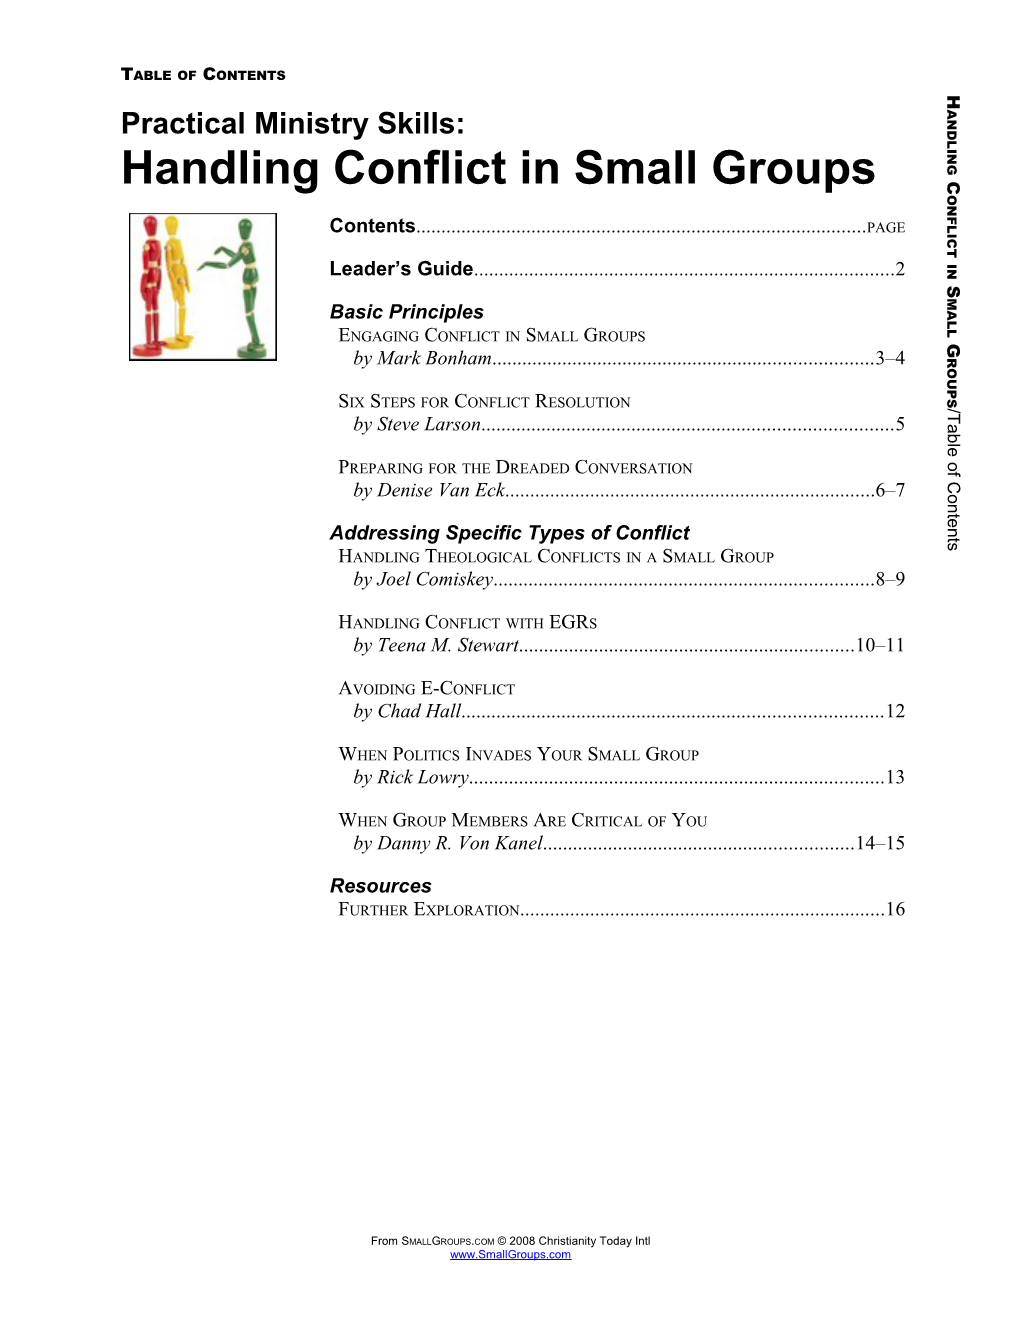 Practical Ministry Skills: Handling Conflict in Small Groups